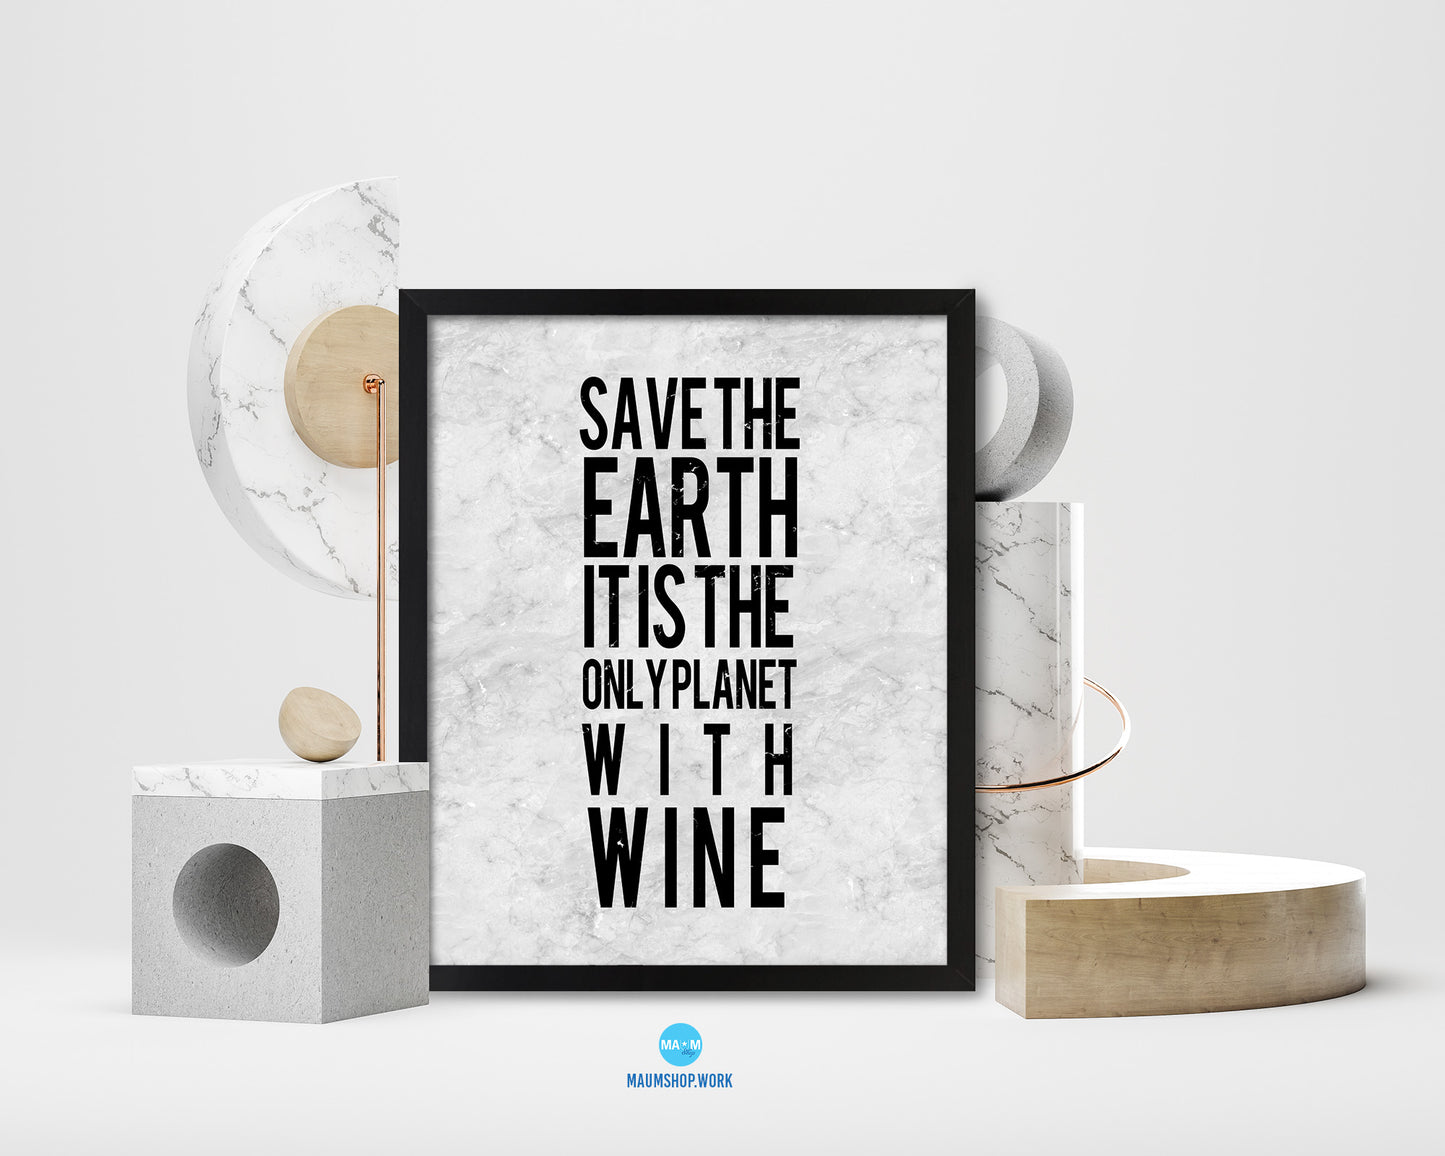 Save the earth it is the only planet with wine Quote Framed Print Wall Art Decor Gifts